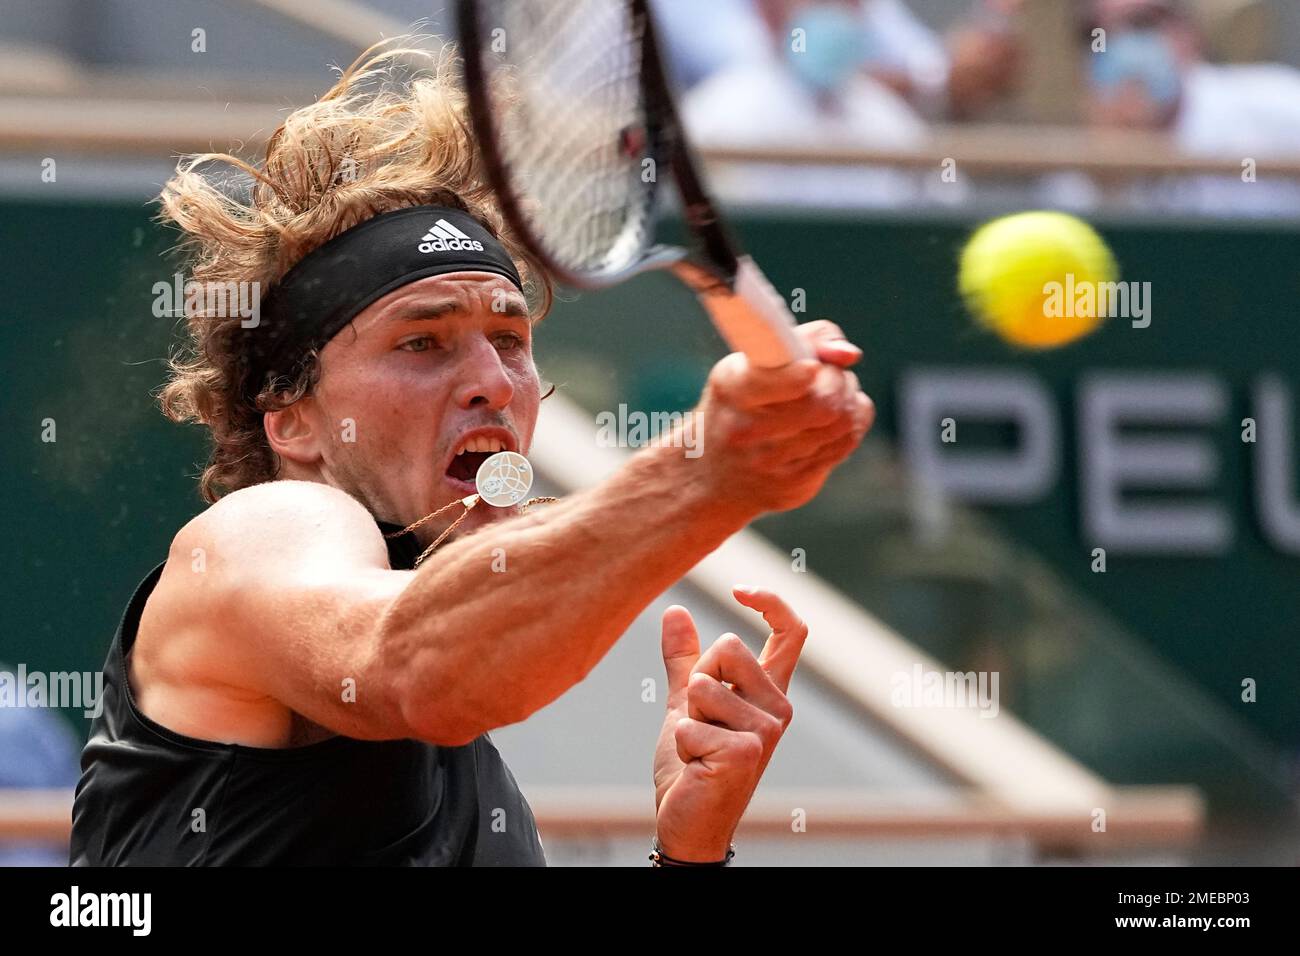 Germanys Alexander Zverev returns the ball to Stefanos Tsitsipas of Greece during their semifinal match of the French Open tennis tournament at the Roland Garros stadium Friday, June 11, 2021 in Paris